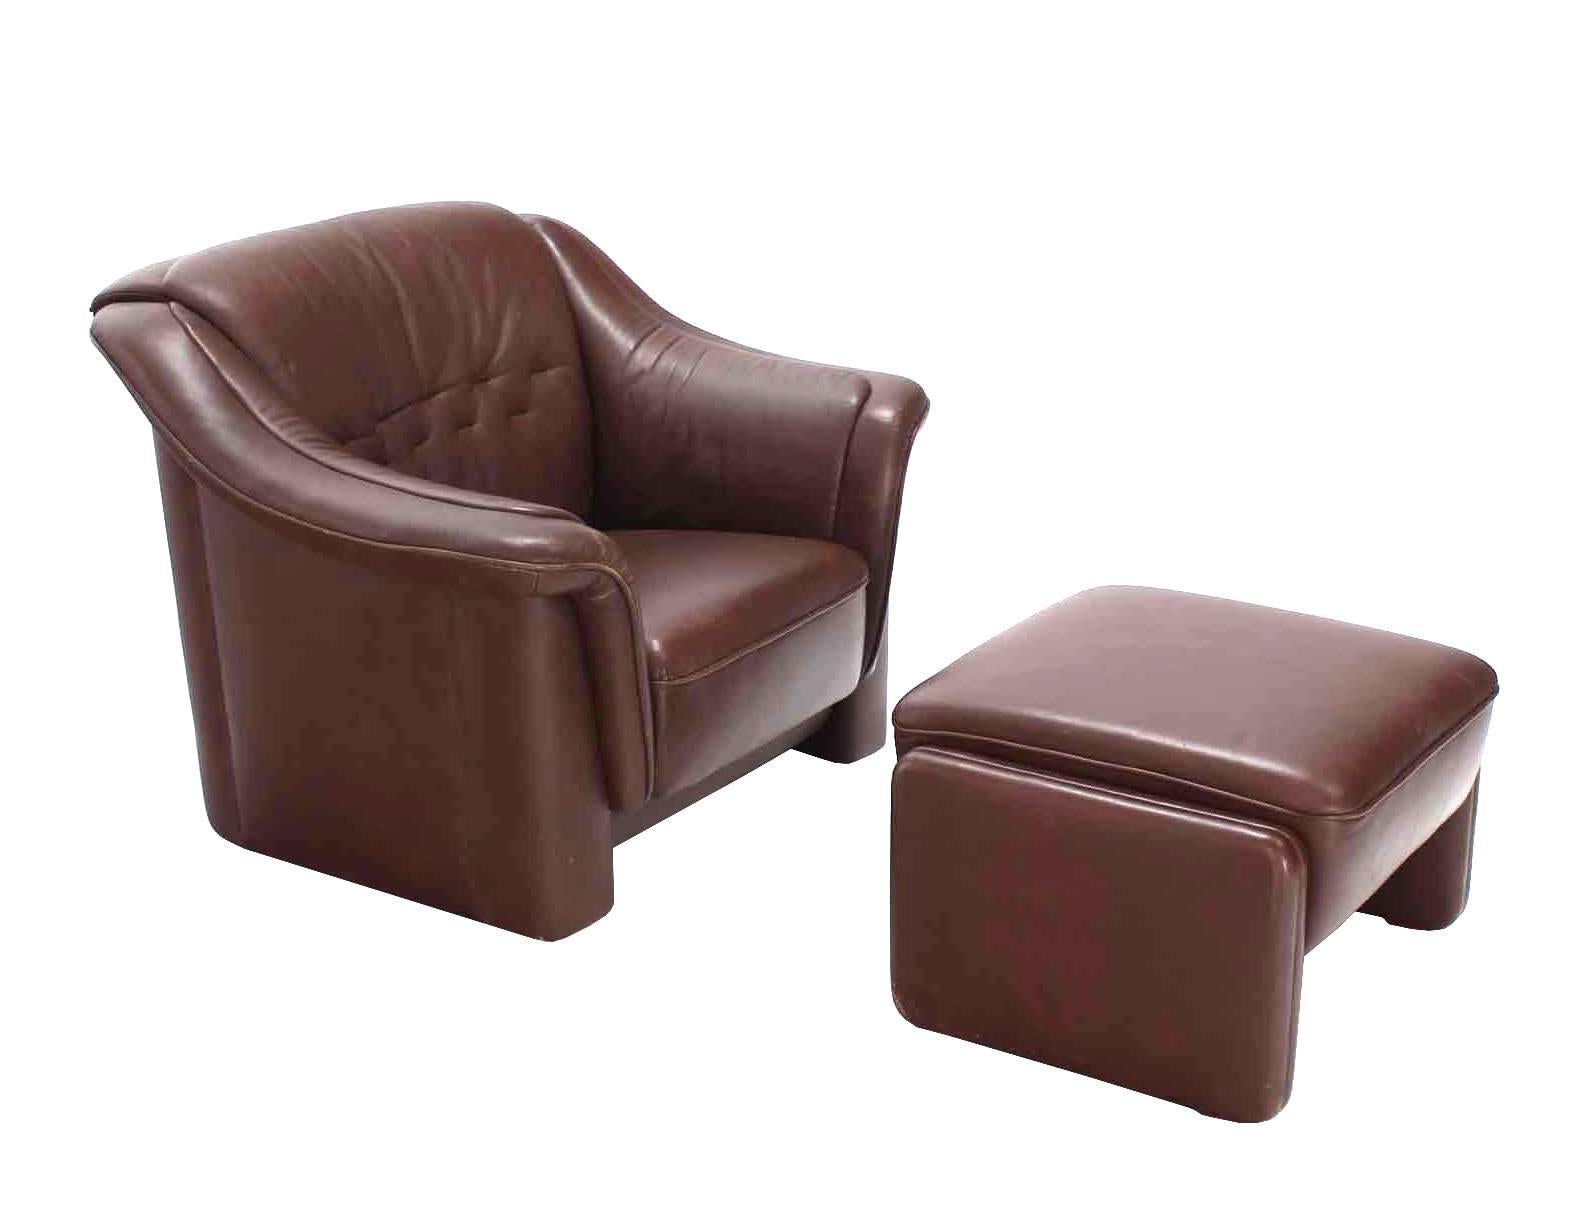 Pair of very nice Mid-Century Modern leather brown lounge chairs with adjustable matching ottomans. 24 x 23 x 16 ottoman.